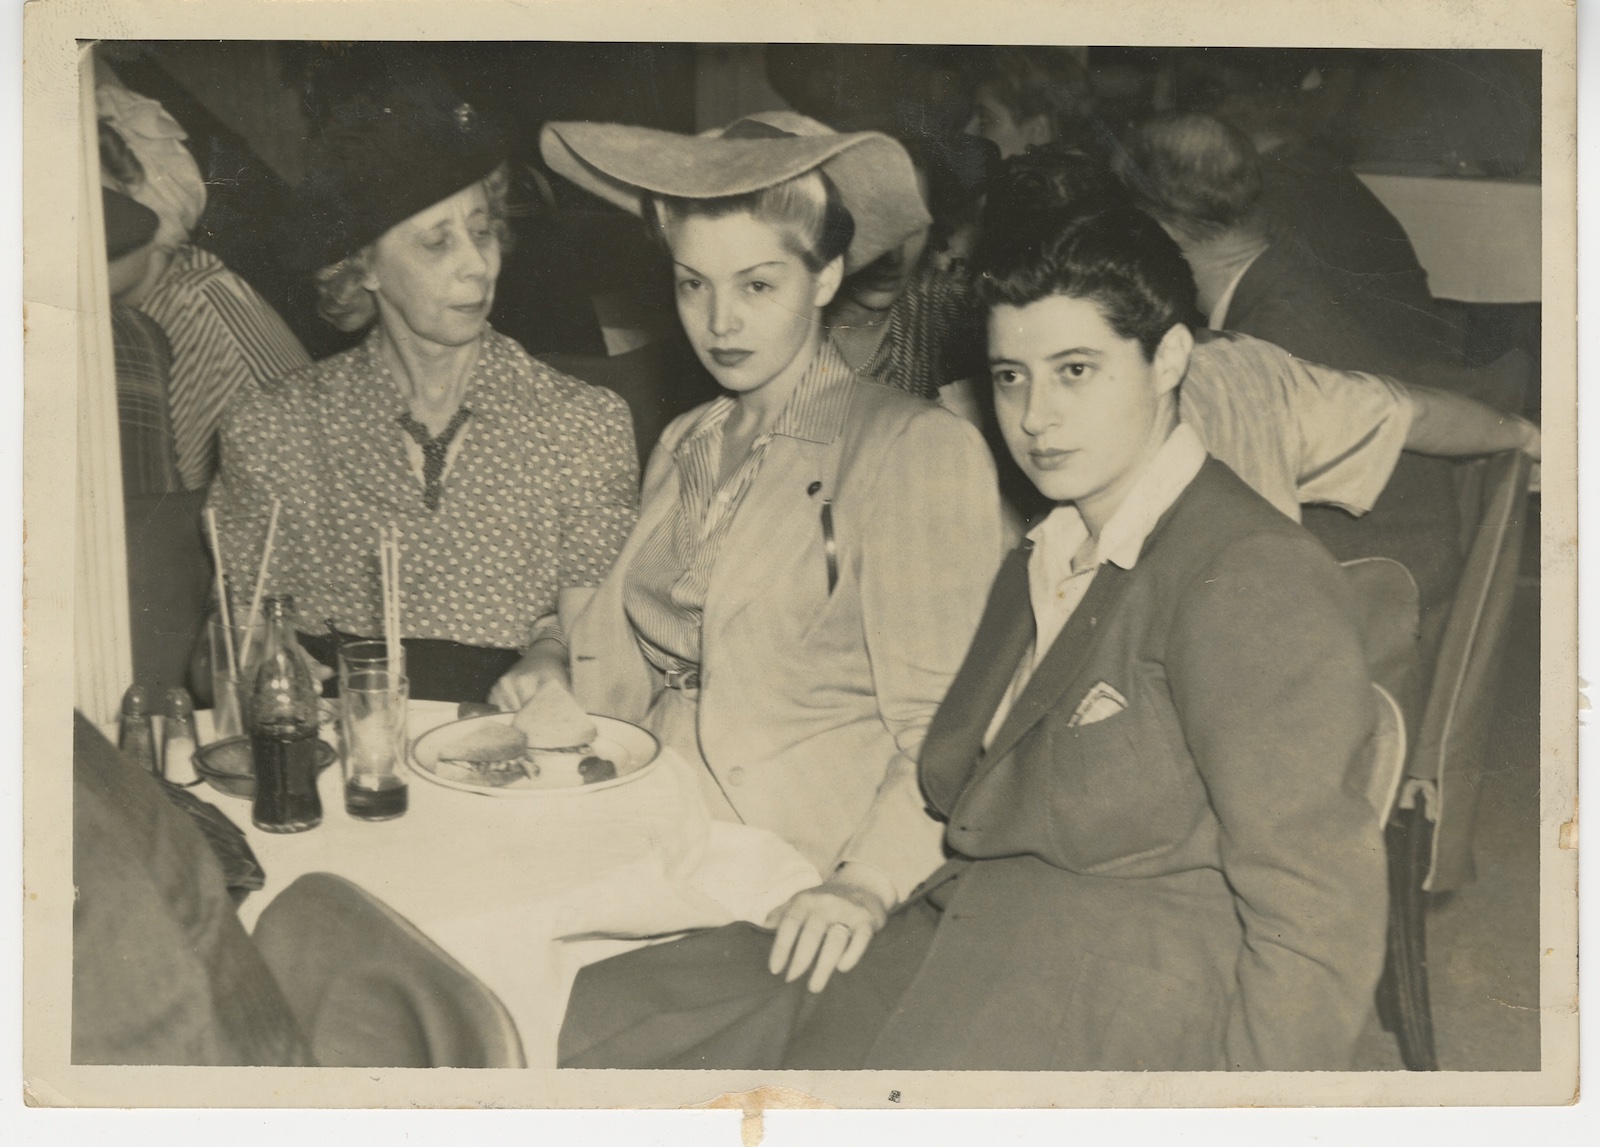 Photo of Zorita with mother and Gus